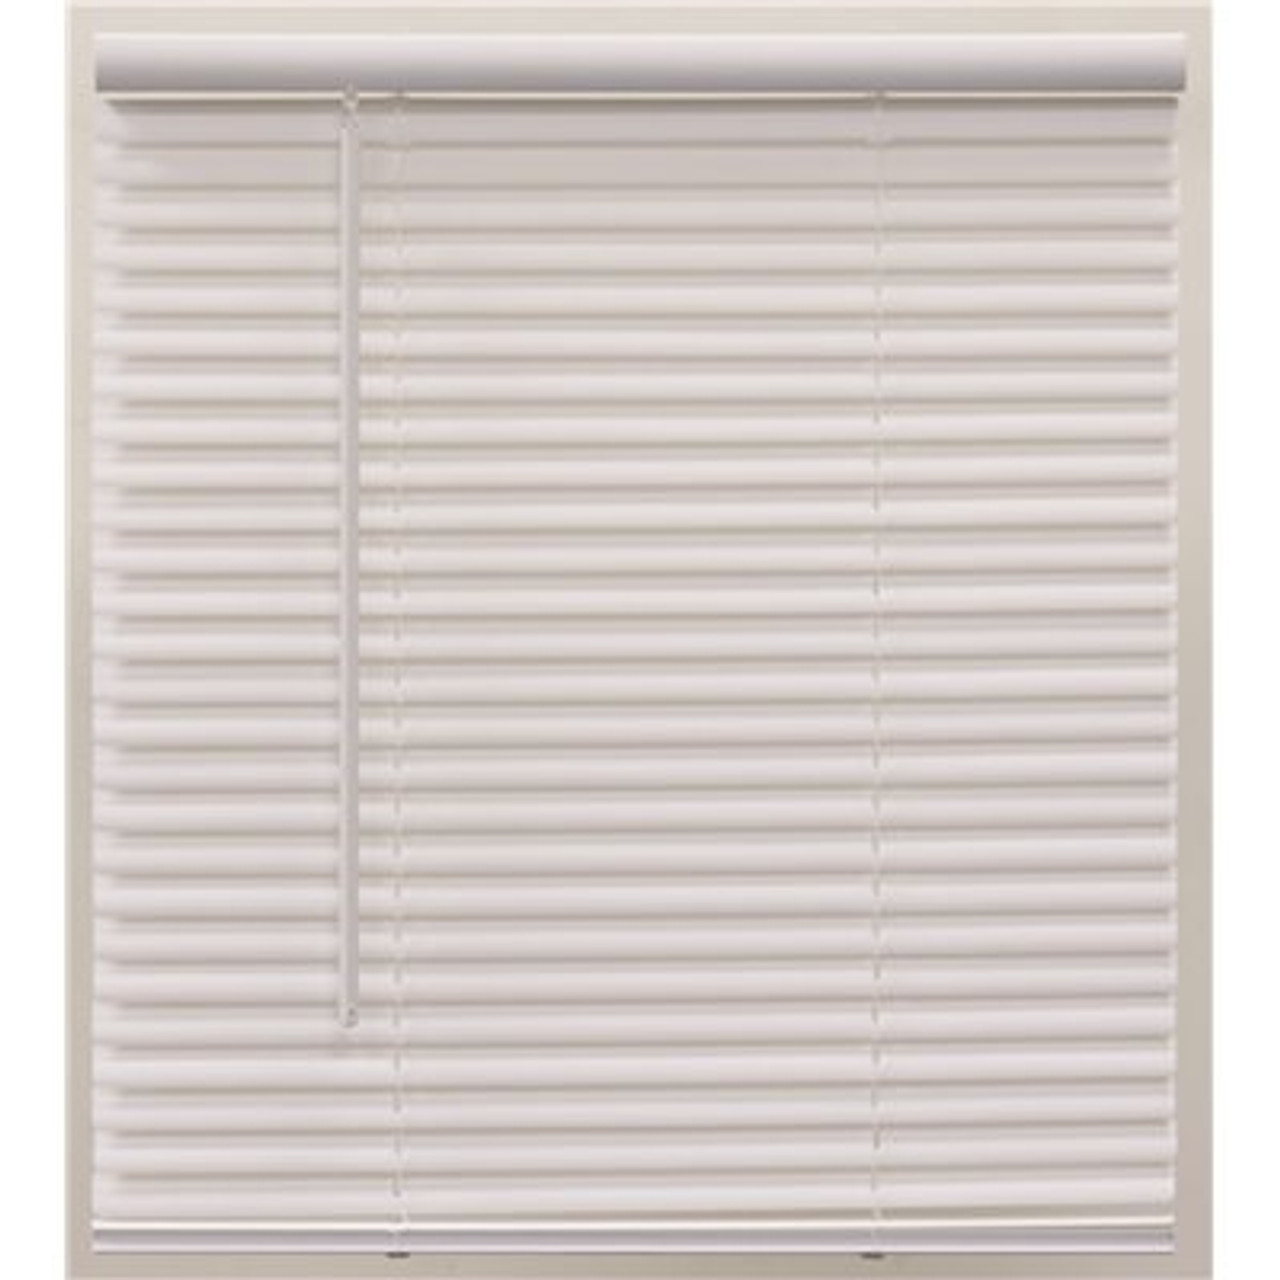 Champion Pre-Cut 45 in. W x 72 in. L White Cordless Light Filtering Vinyl Mini Blind with 1 in. Slats